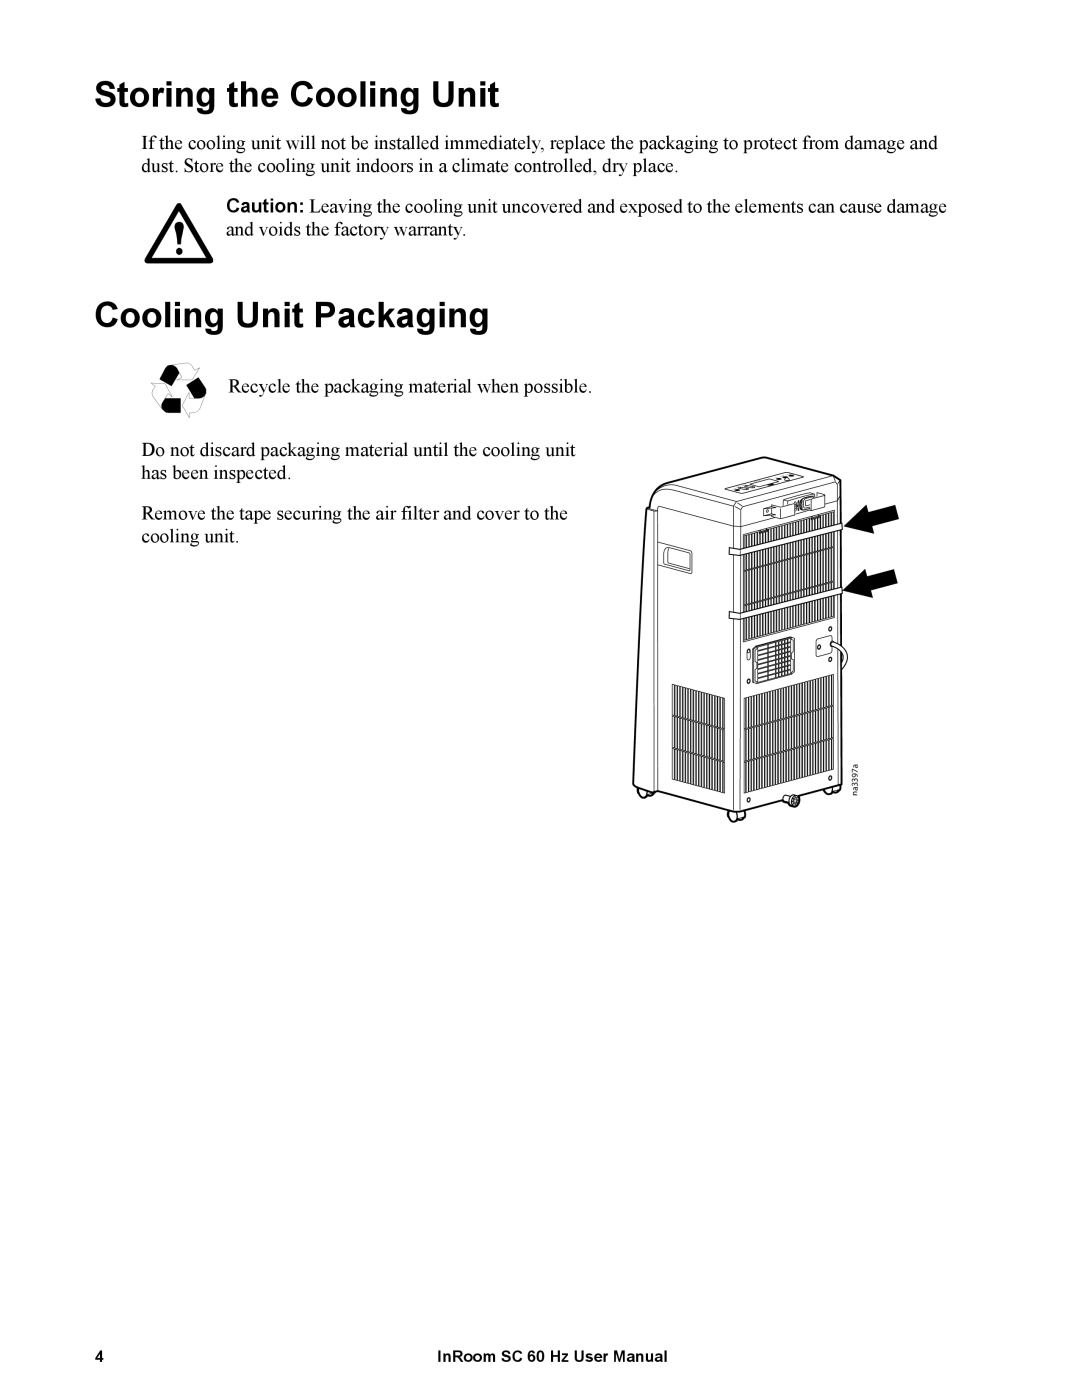 APC ACPSC3500, ACPSC2000 user manual Storing the Cooling Unit, Cooling Unit Packaging 